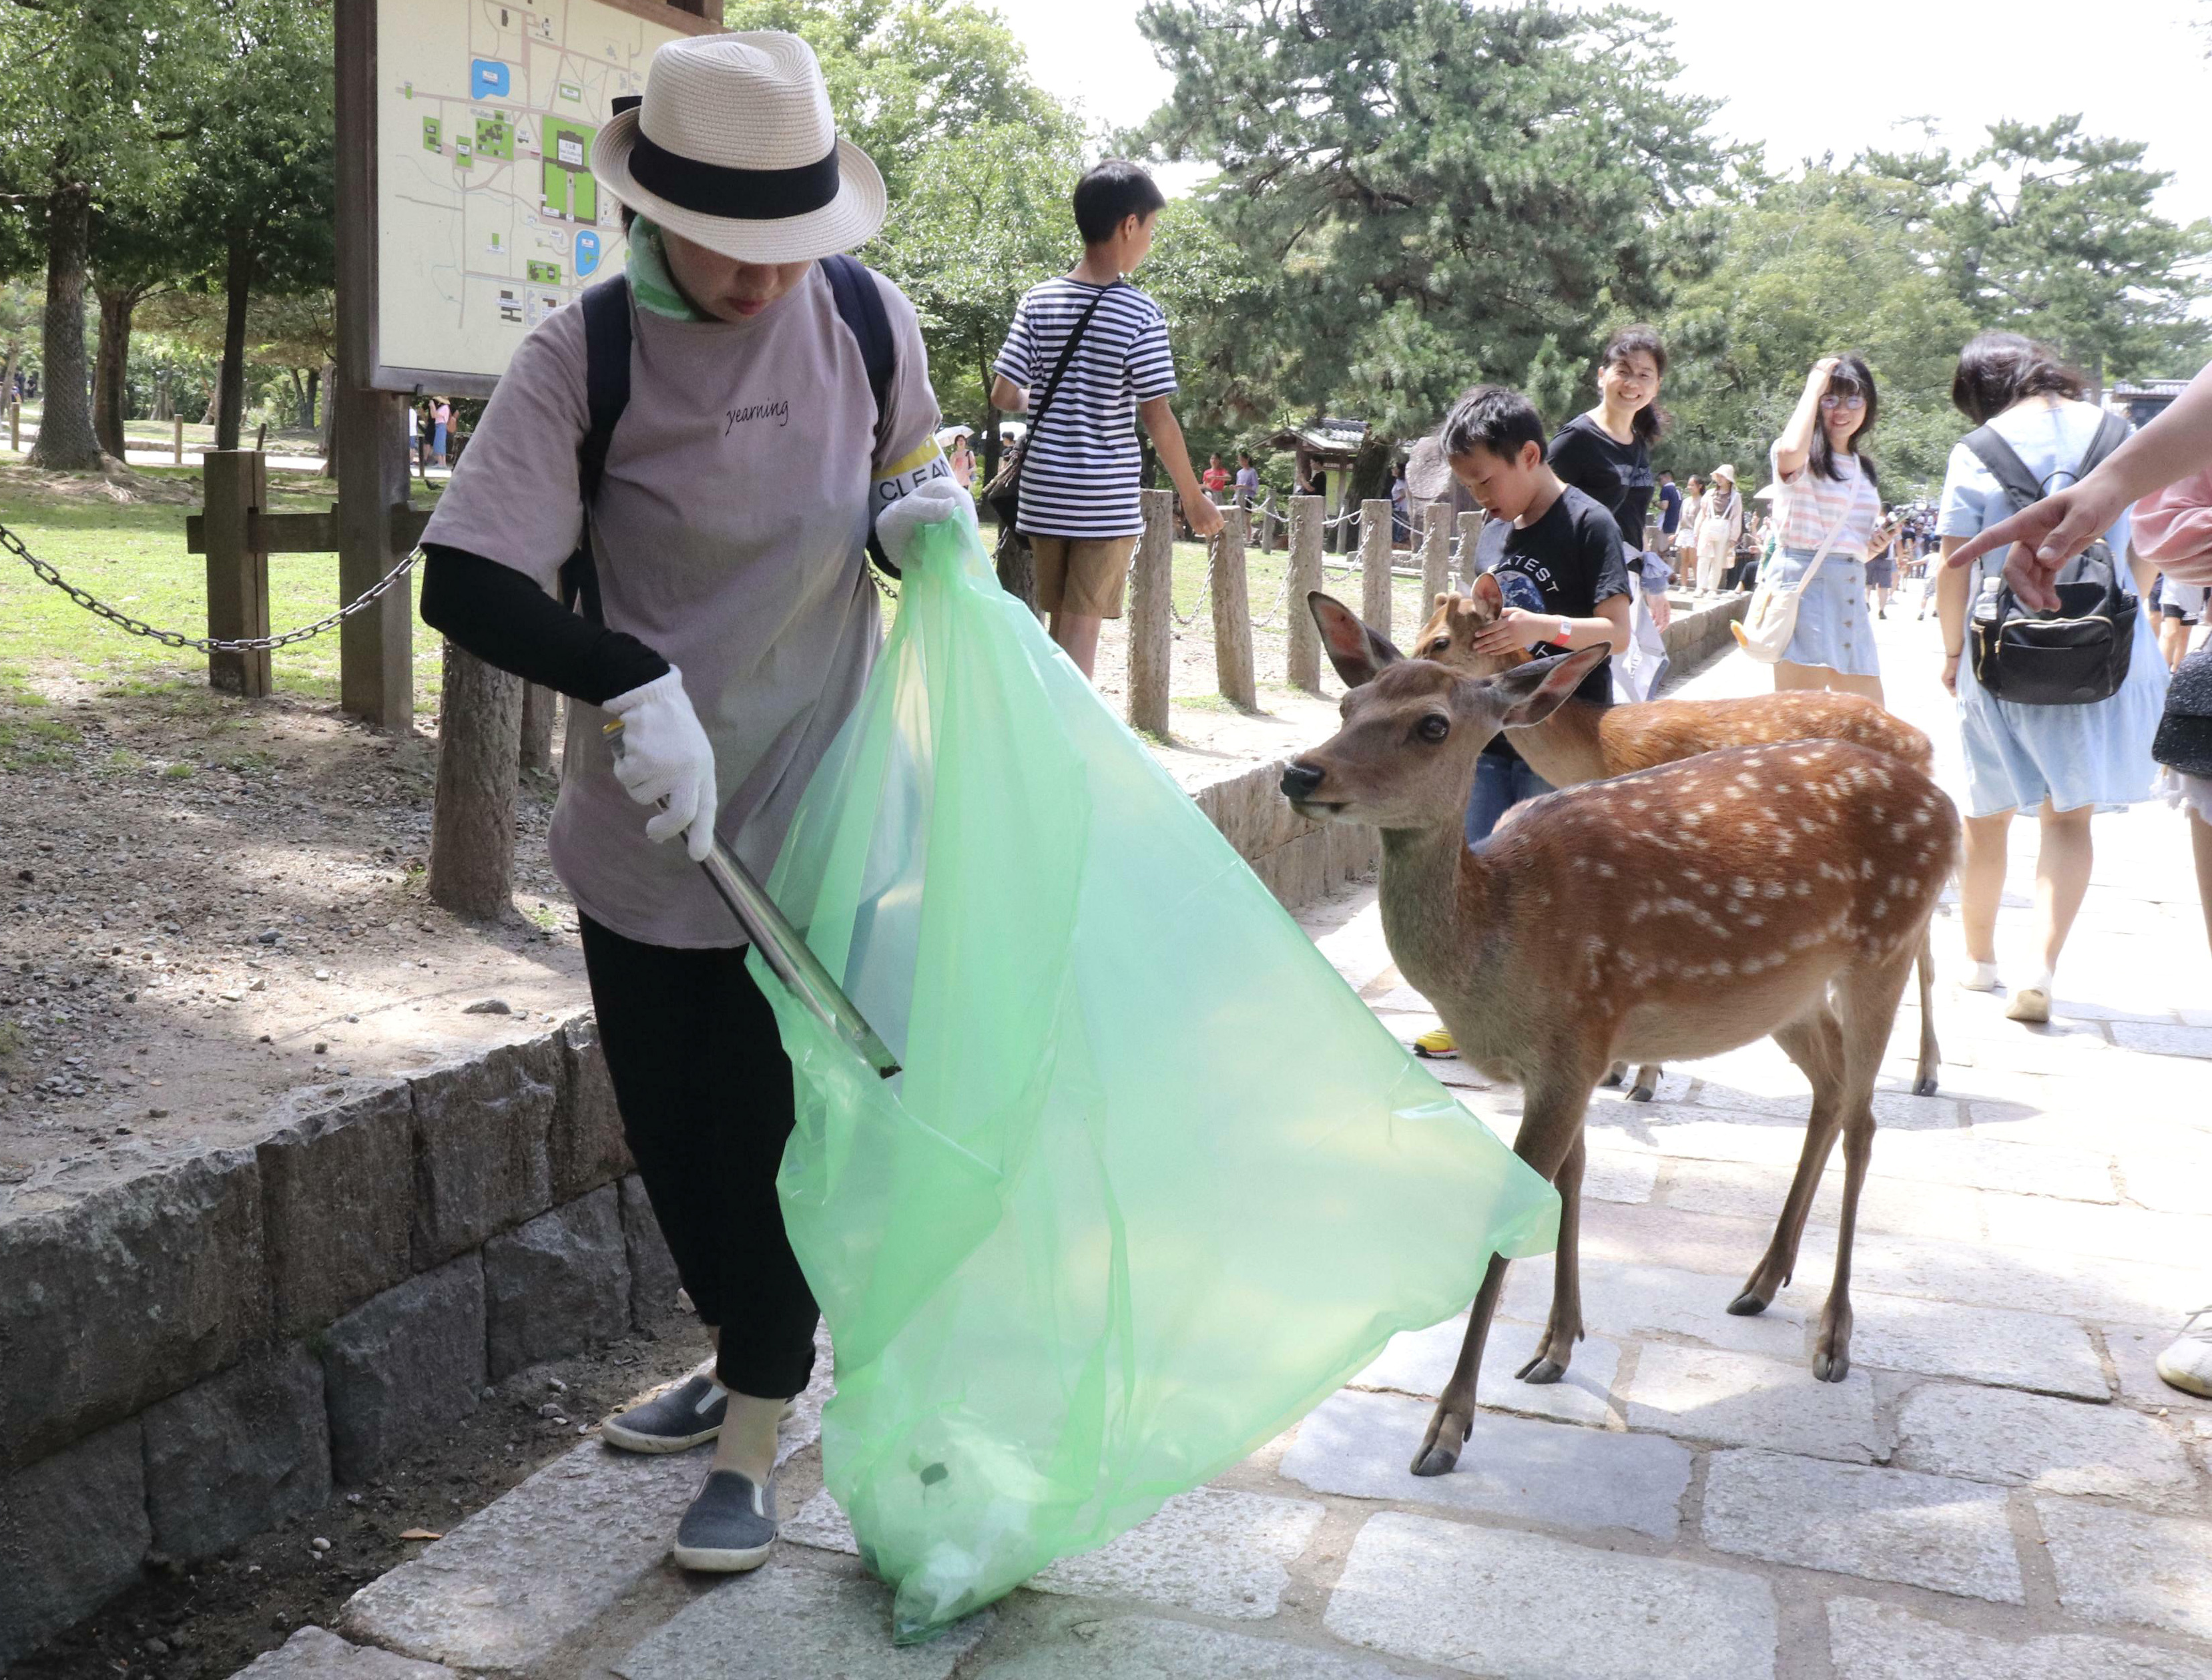 A volunteer picks up plastic products during a cleanup campaign at a famed park in Nara, western Japan, Wednesday, July 10, 2019. Nine deer at the park have died recently after swallowing plastic bags. Nara Park has more than 1,000 deer and tourists can feed them special sugar-free crackers sold in shops nearby. The crackers don’t come in plastic bags, but people still carry them. A veterinarian says the deer may associate the plastic with food. (Kyodo News via AP)